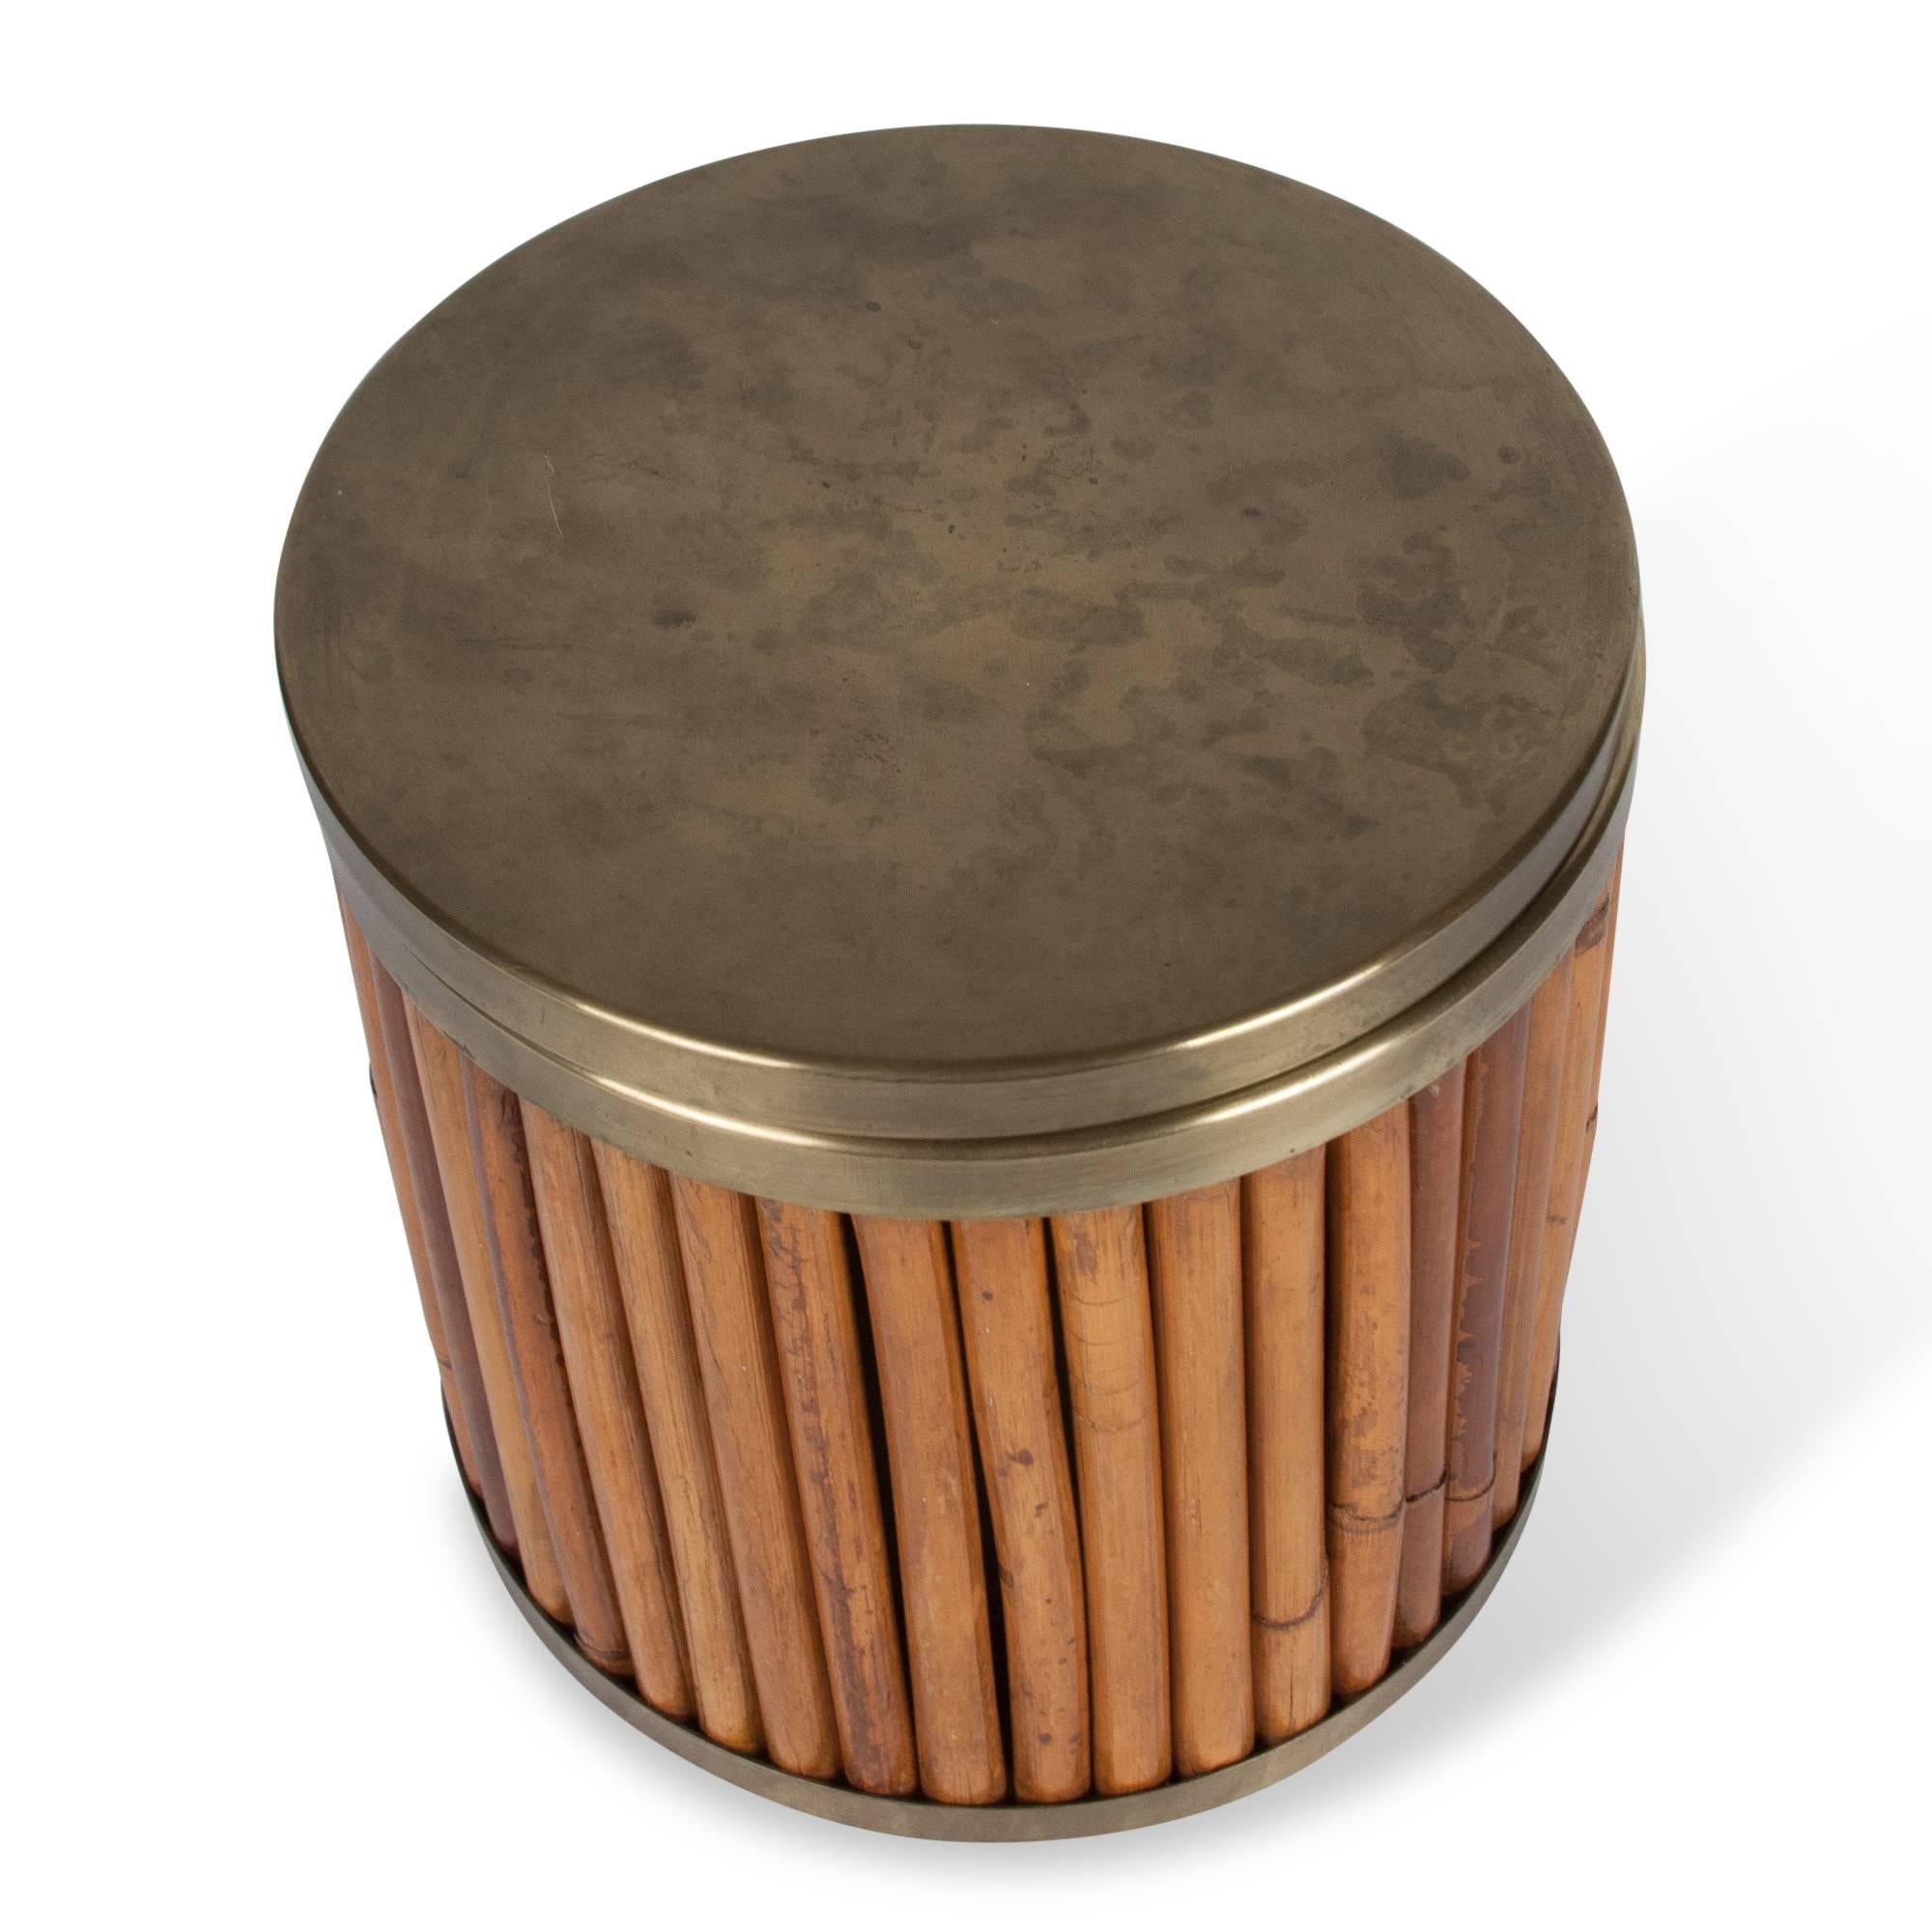 Bamboo and brass wastebasket, vertical bamboo rods resting in brass cap and base, with brass lid, by Gabriella Crespi, Italy 1970s. Measures: Height 8 1/2 in, diameter 8 1/4 in. (sats)

Note: Some signs of gentle use and normal aging to brass.